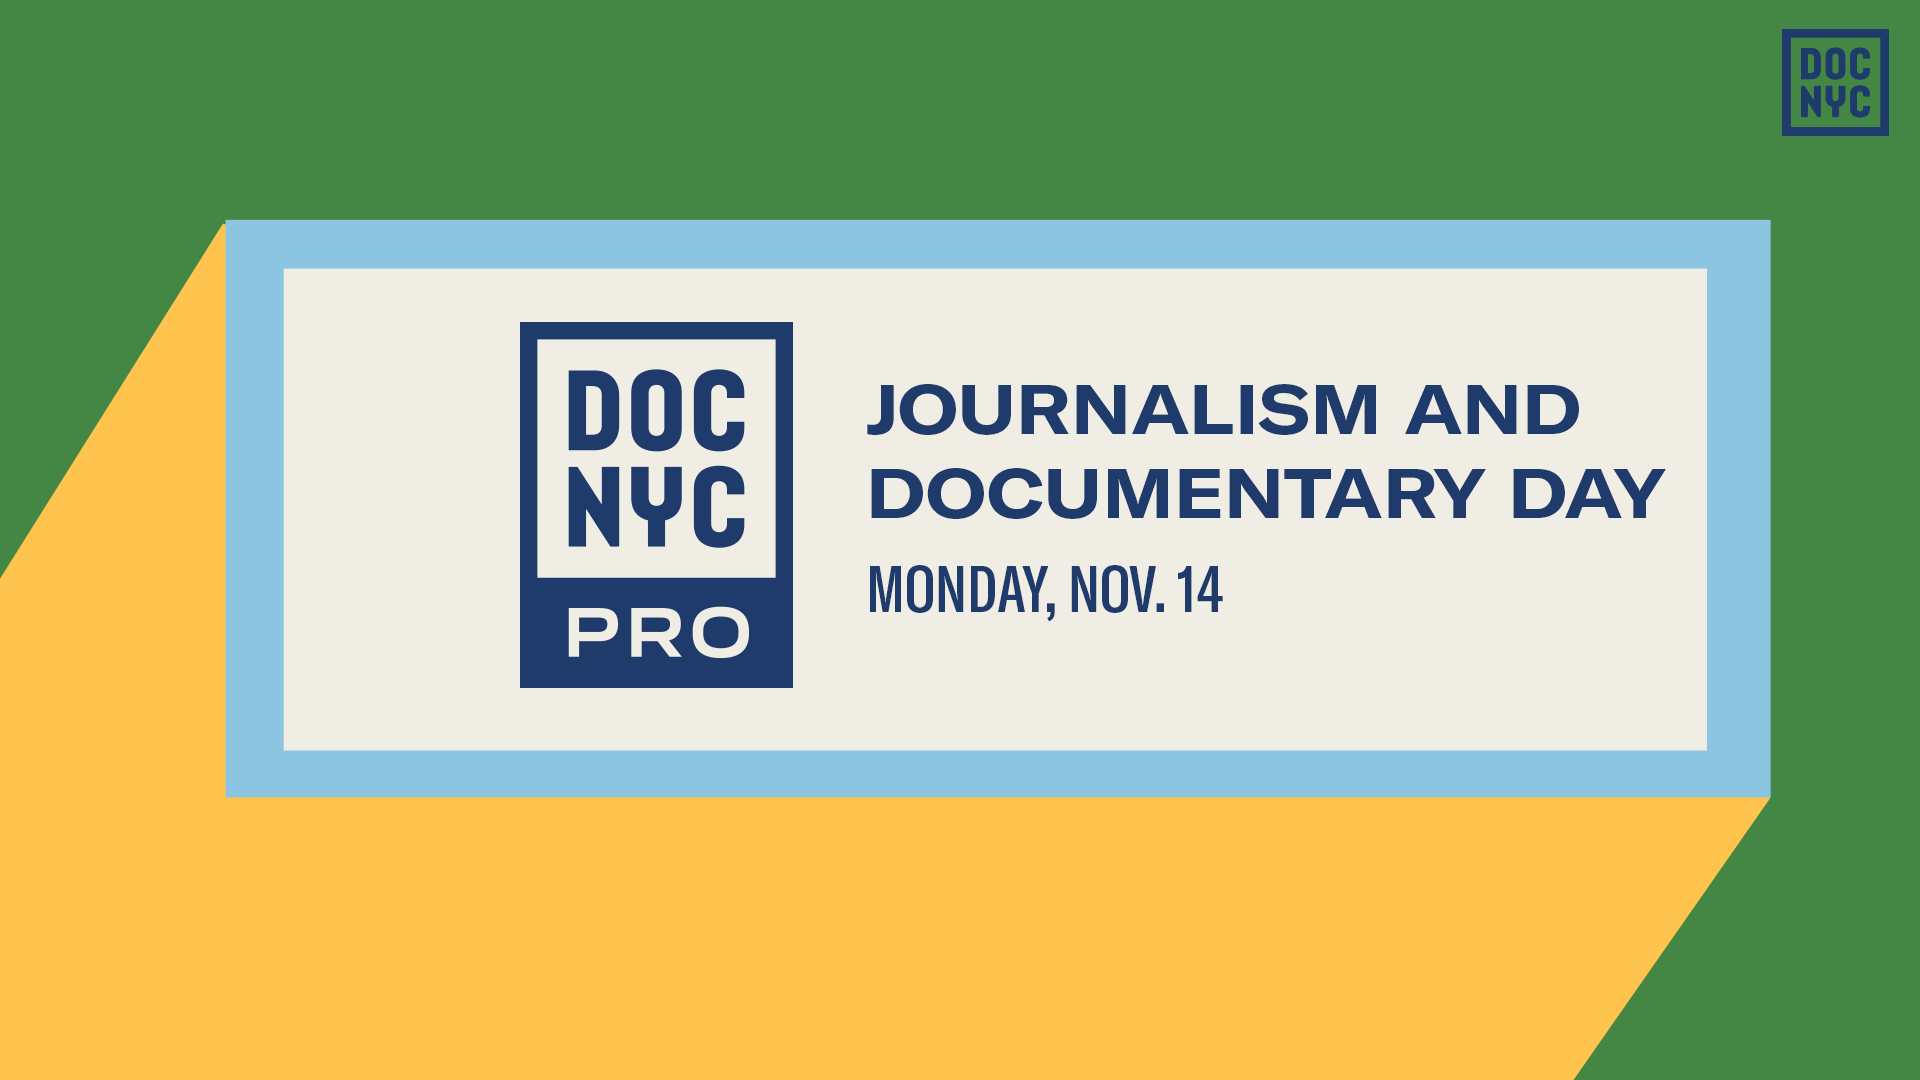 Journalism and Documentary Day (Nov. 14)